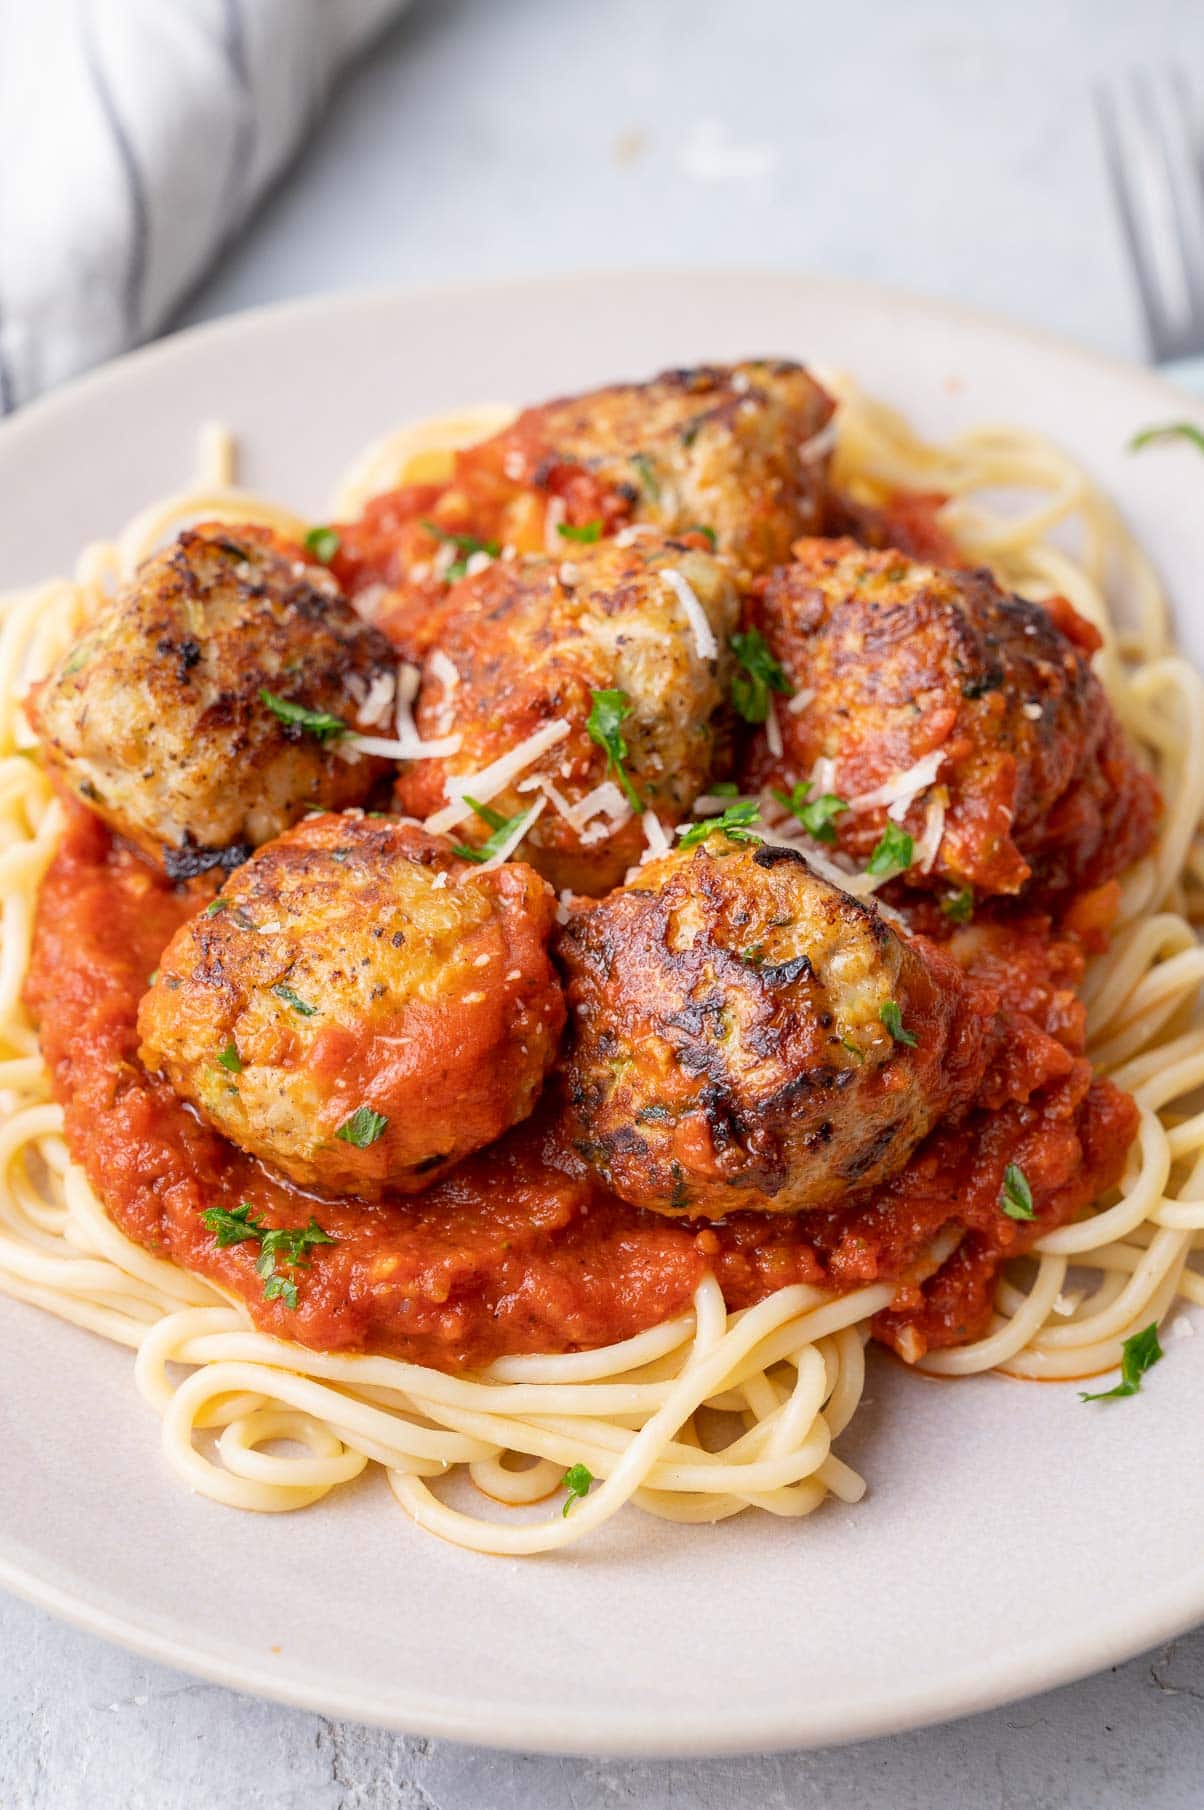 Turkey zucchini meatballs with tomato sauce and spaghetti on a beige plate.